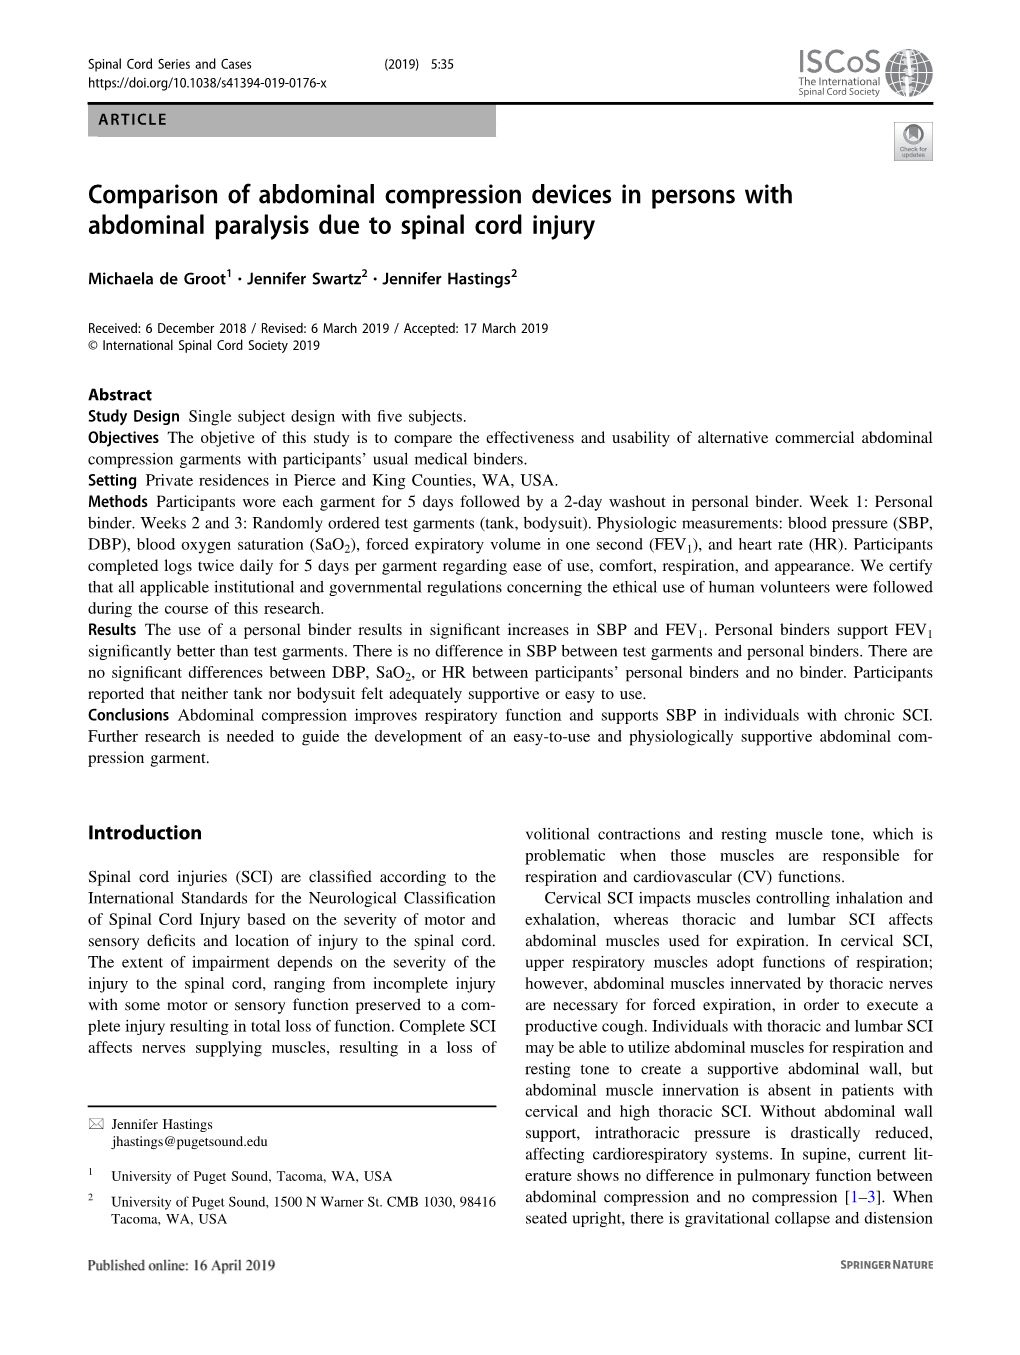 Comparison of Abdominal Compression Devices in Persons with Abdominal Paralysis Due to Spinal Cord Injury